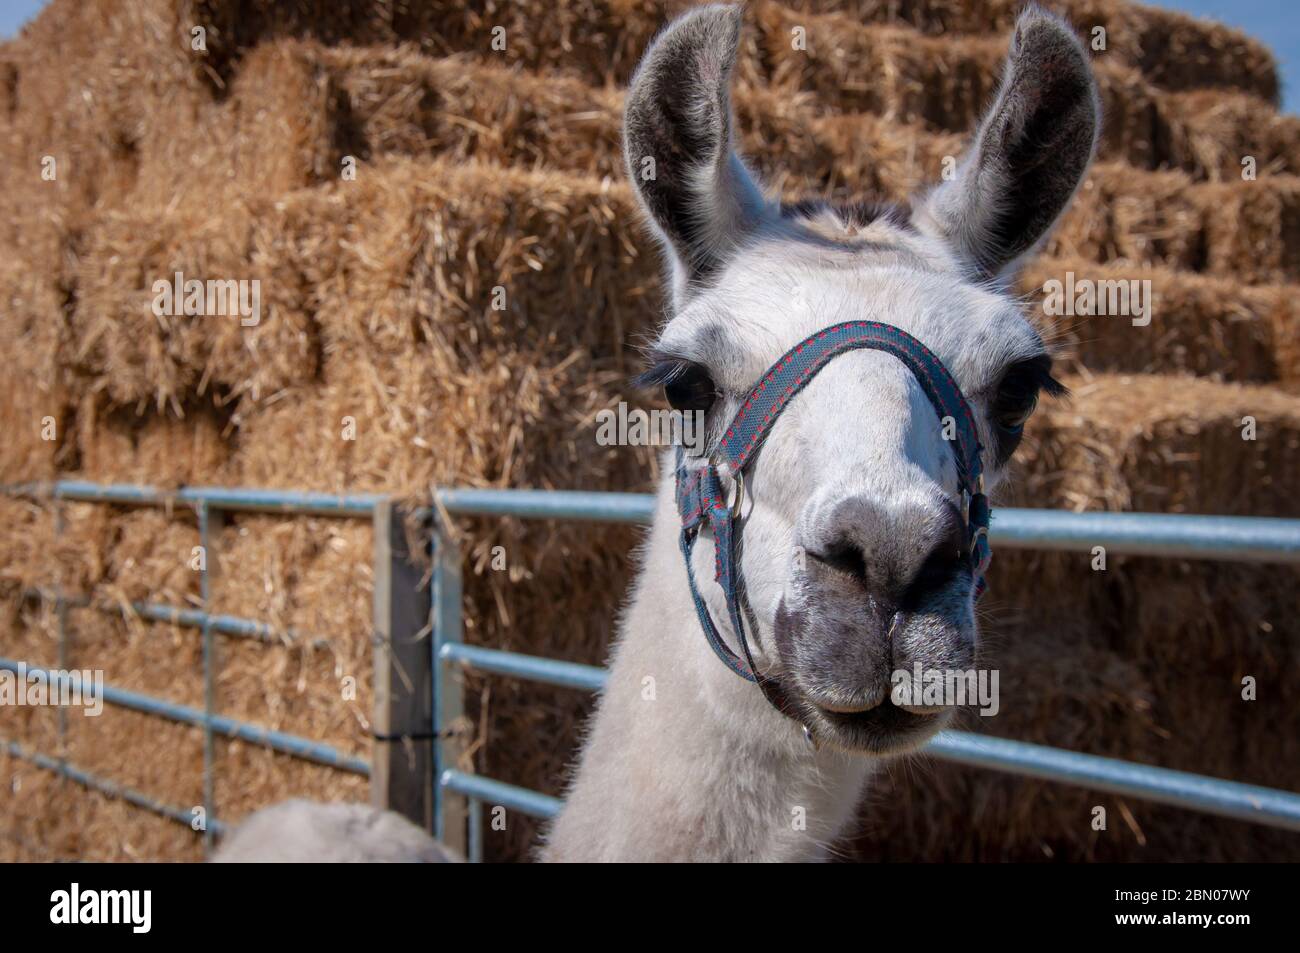 A curious llama with a harness looking straight at camera beside a farm gate with large straw bails in the background Stock Photo